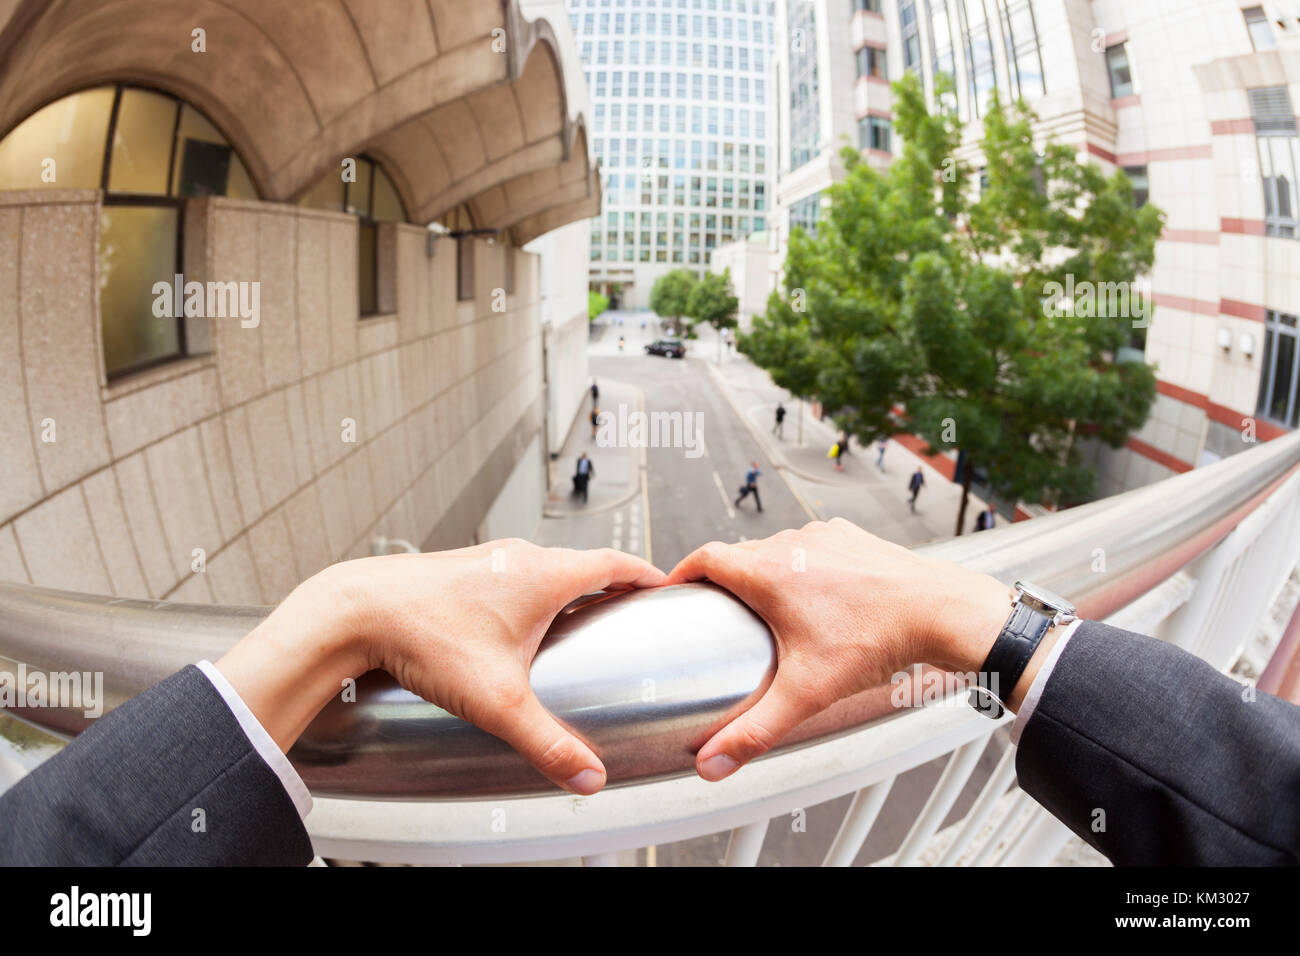 Personal perspective time lapse of a caucasian businessman resting his hands on railings Stock Photo